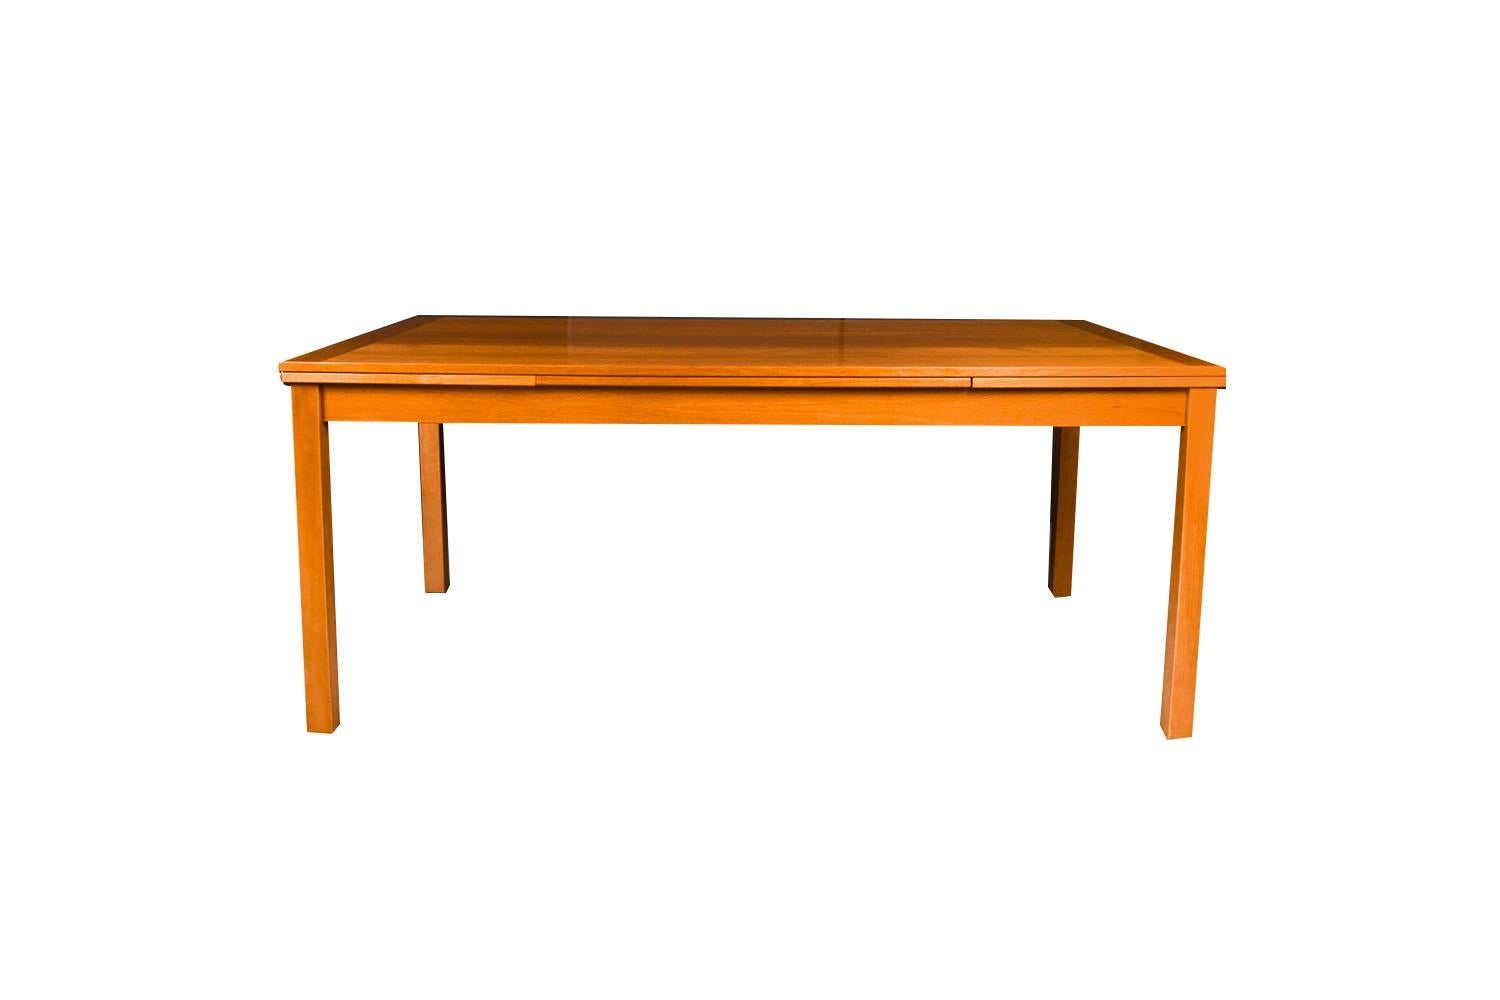 An exceptional Danish Modern teak extension dining table by Ansager Mobler made in Denmark. With an initial large footprint, this table can also offer a generous space and double in size once its hidden draw leaves are extended. Amazing design and